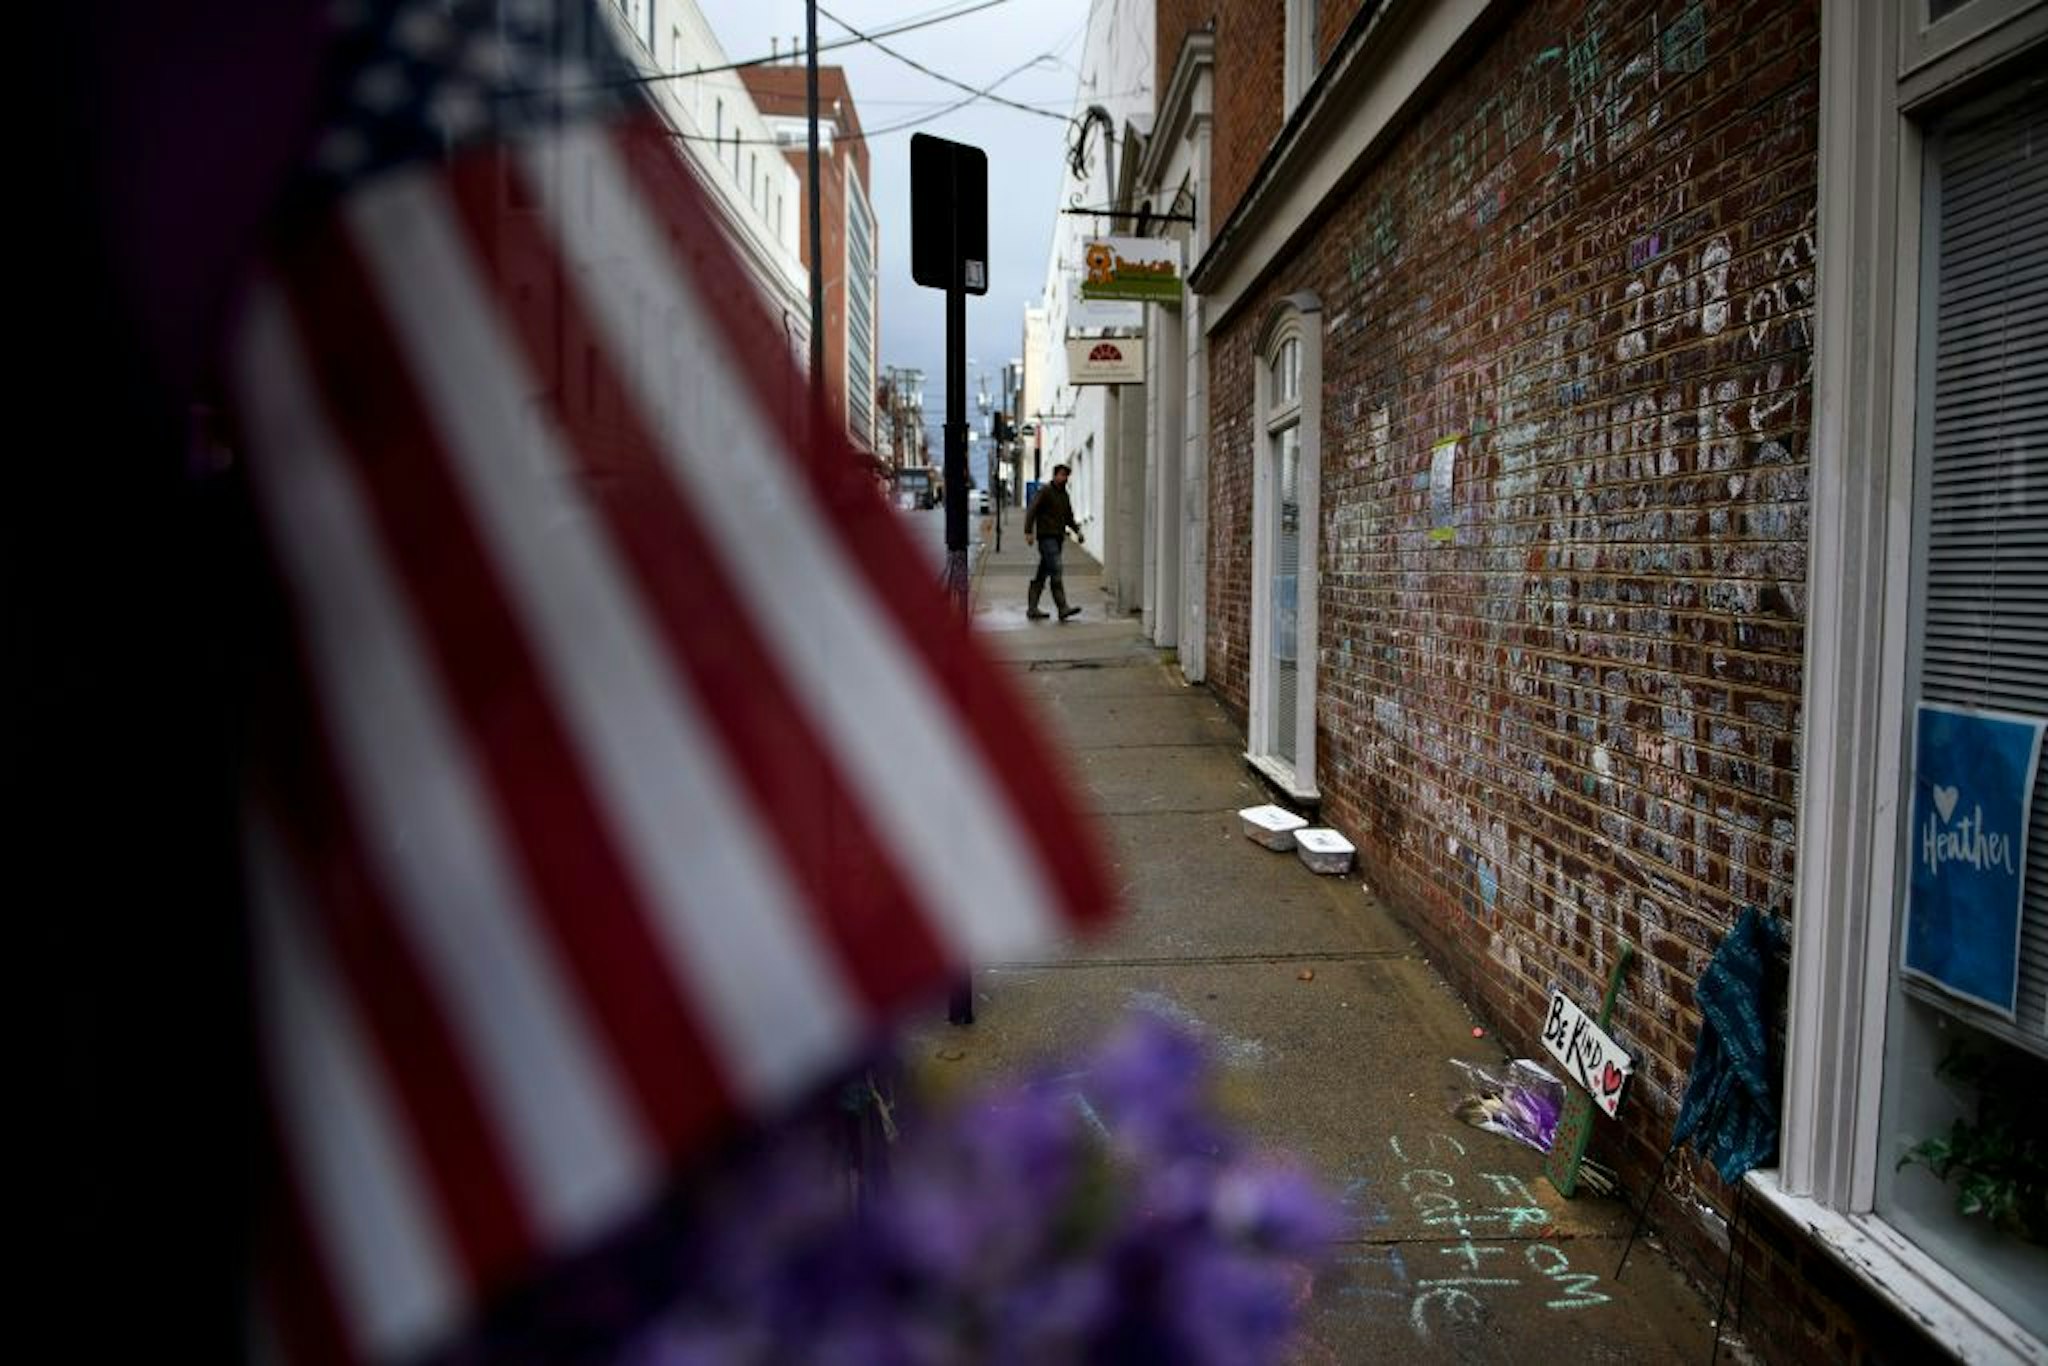 A memorial to Heather Heyer and the other victims of last year's hit and run is seen a few blocks away the first day of jury selection for James Fields's murder trial at the Charlottesville Circuit Court, November 26, 2018 in Charlottesville, Virginia. - An American neo-Nazi denied murder at the start of his trial for allegedly ramming his car into counter-protesters at a 2017 white supremacist rally that made the city of Charlottesville a byword for rising racial tensions under President Donald Trump.